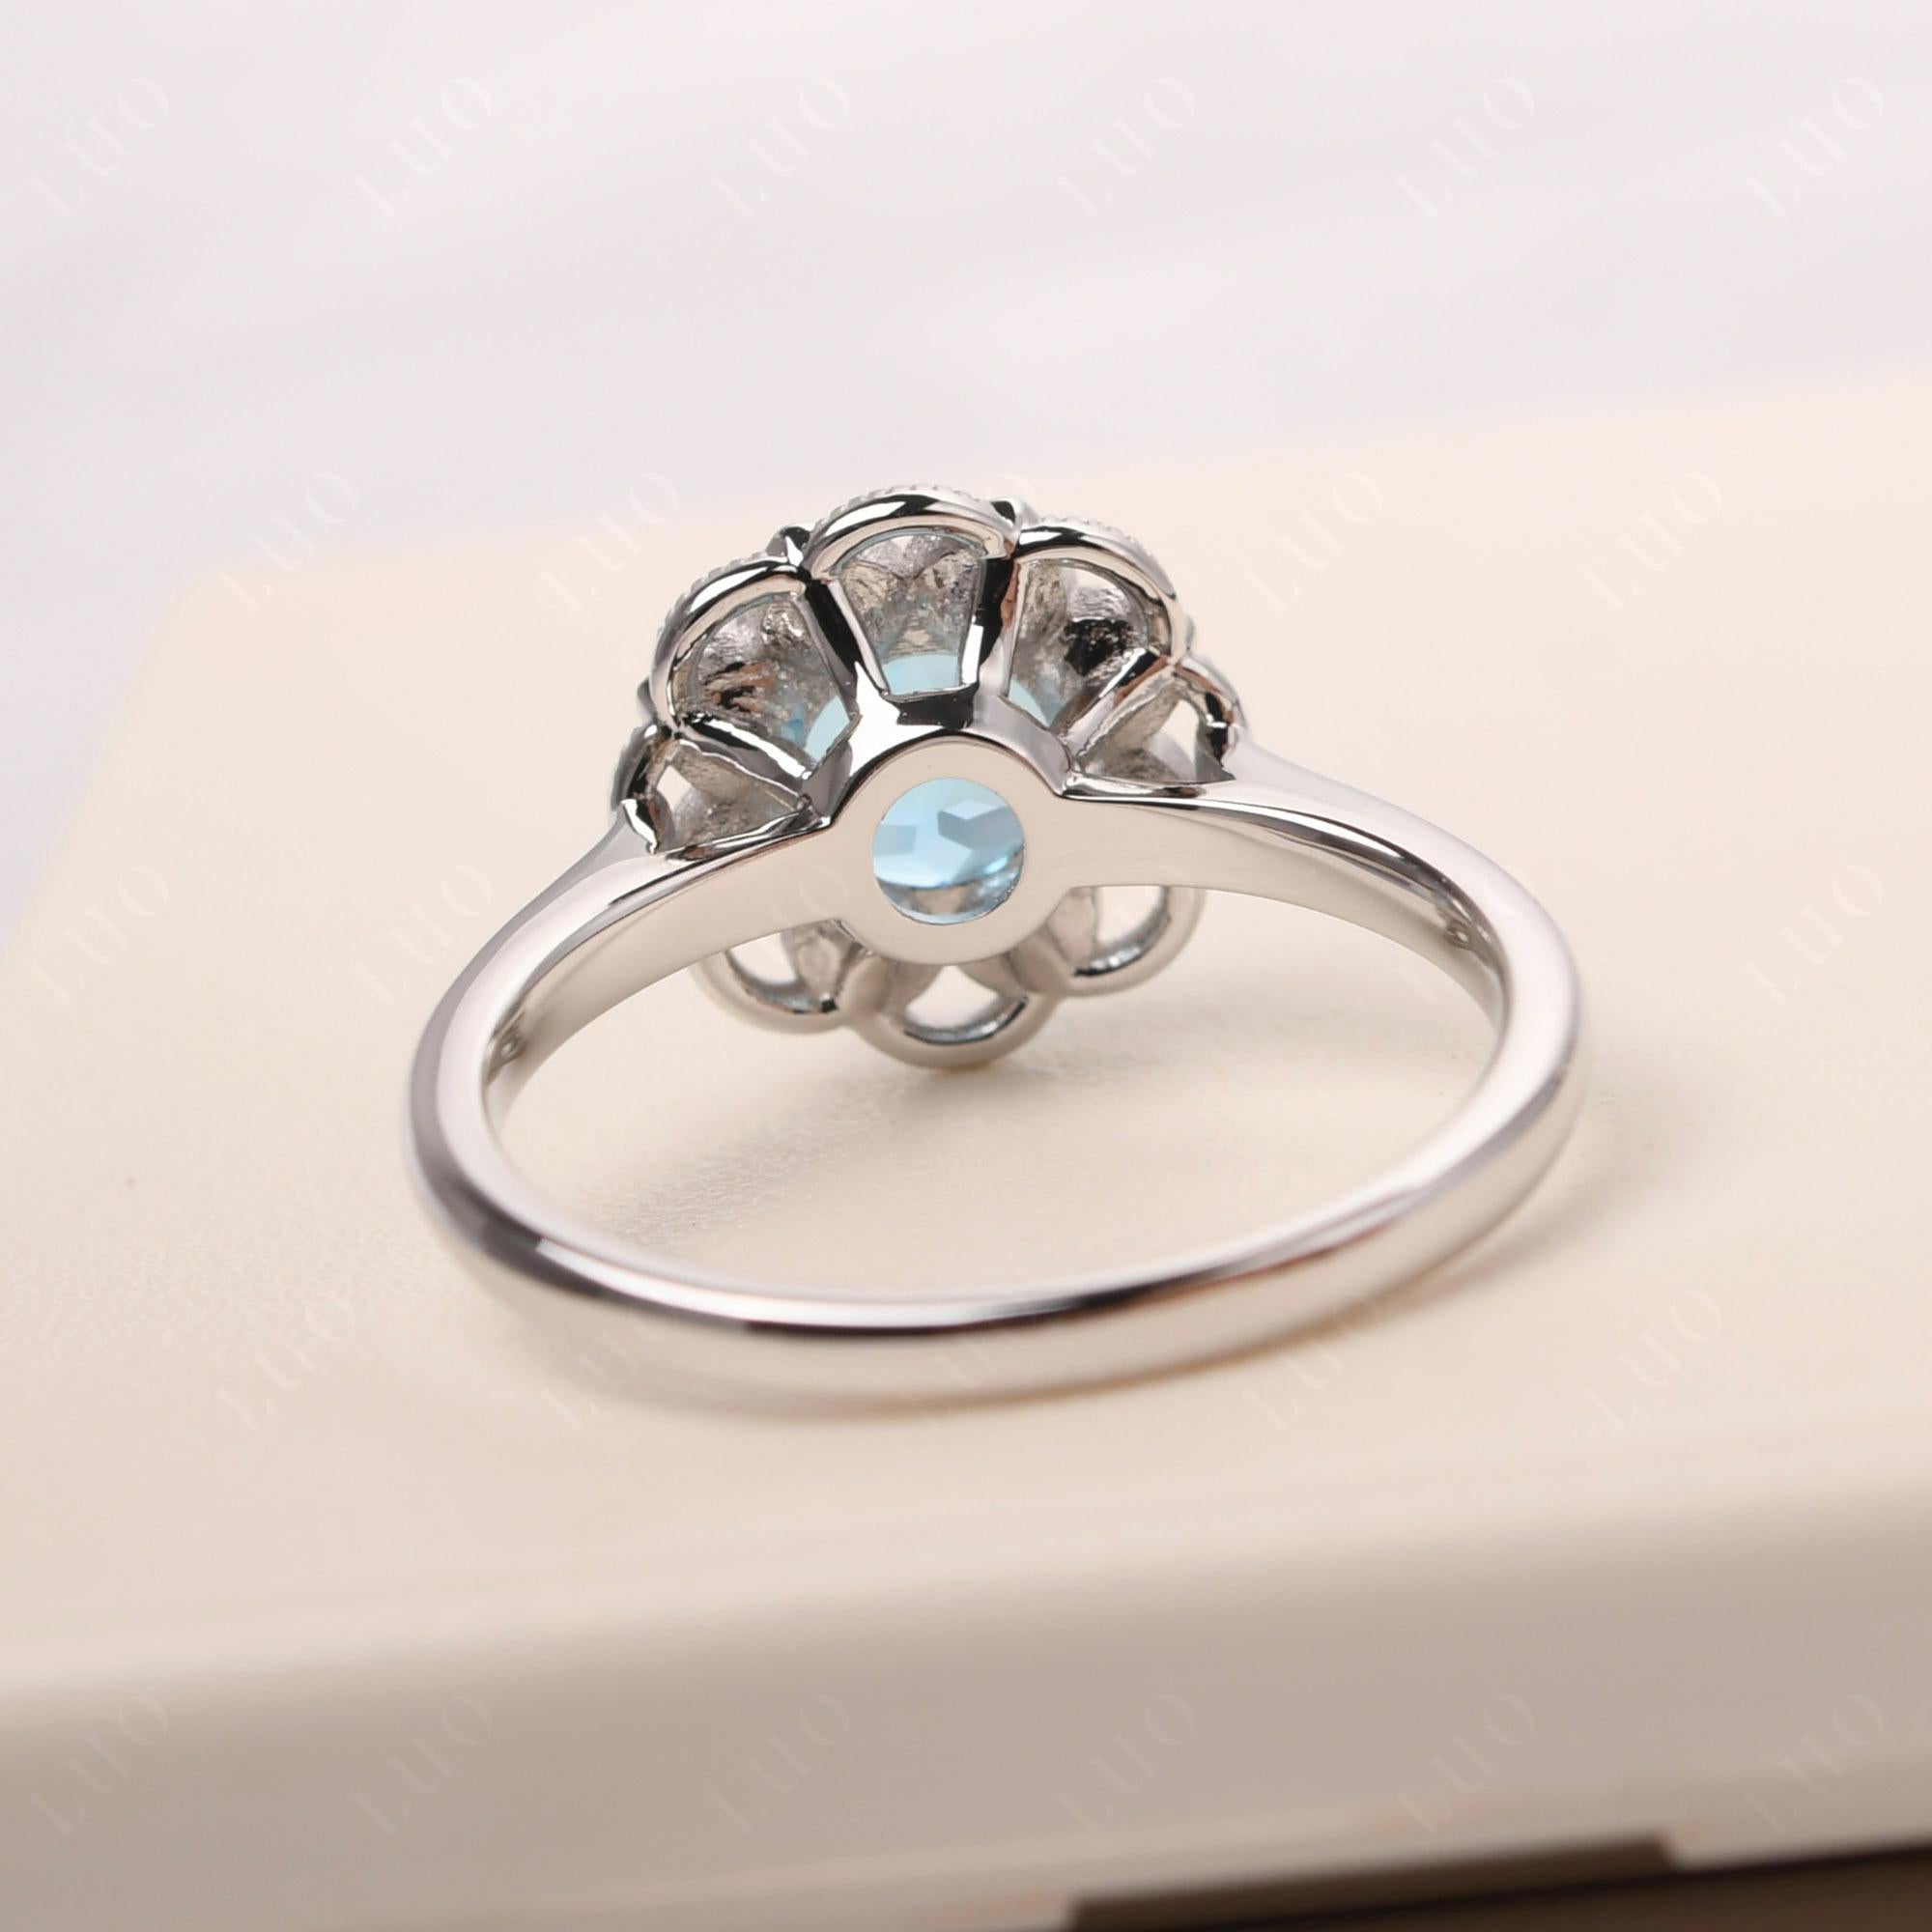 Swiss Blue Topaz Vintage Inspired Filigree Ring - LUO Jewelry